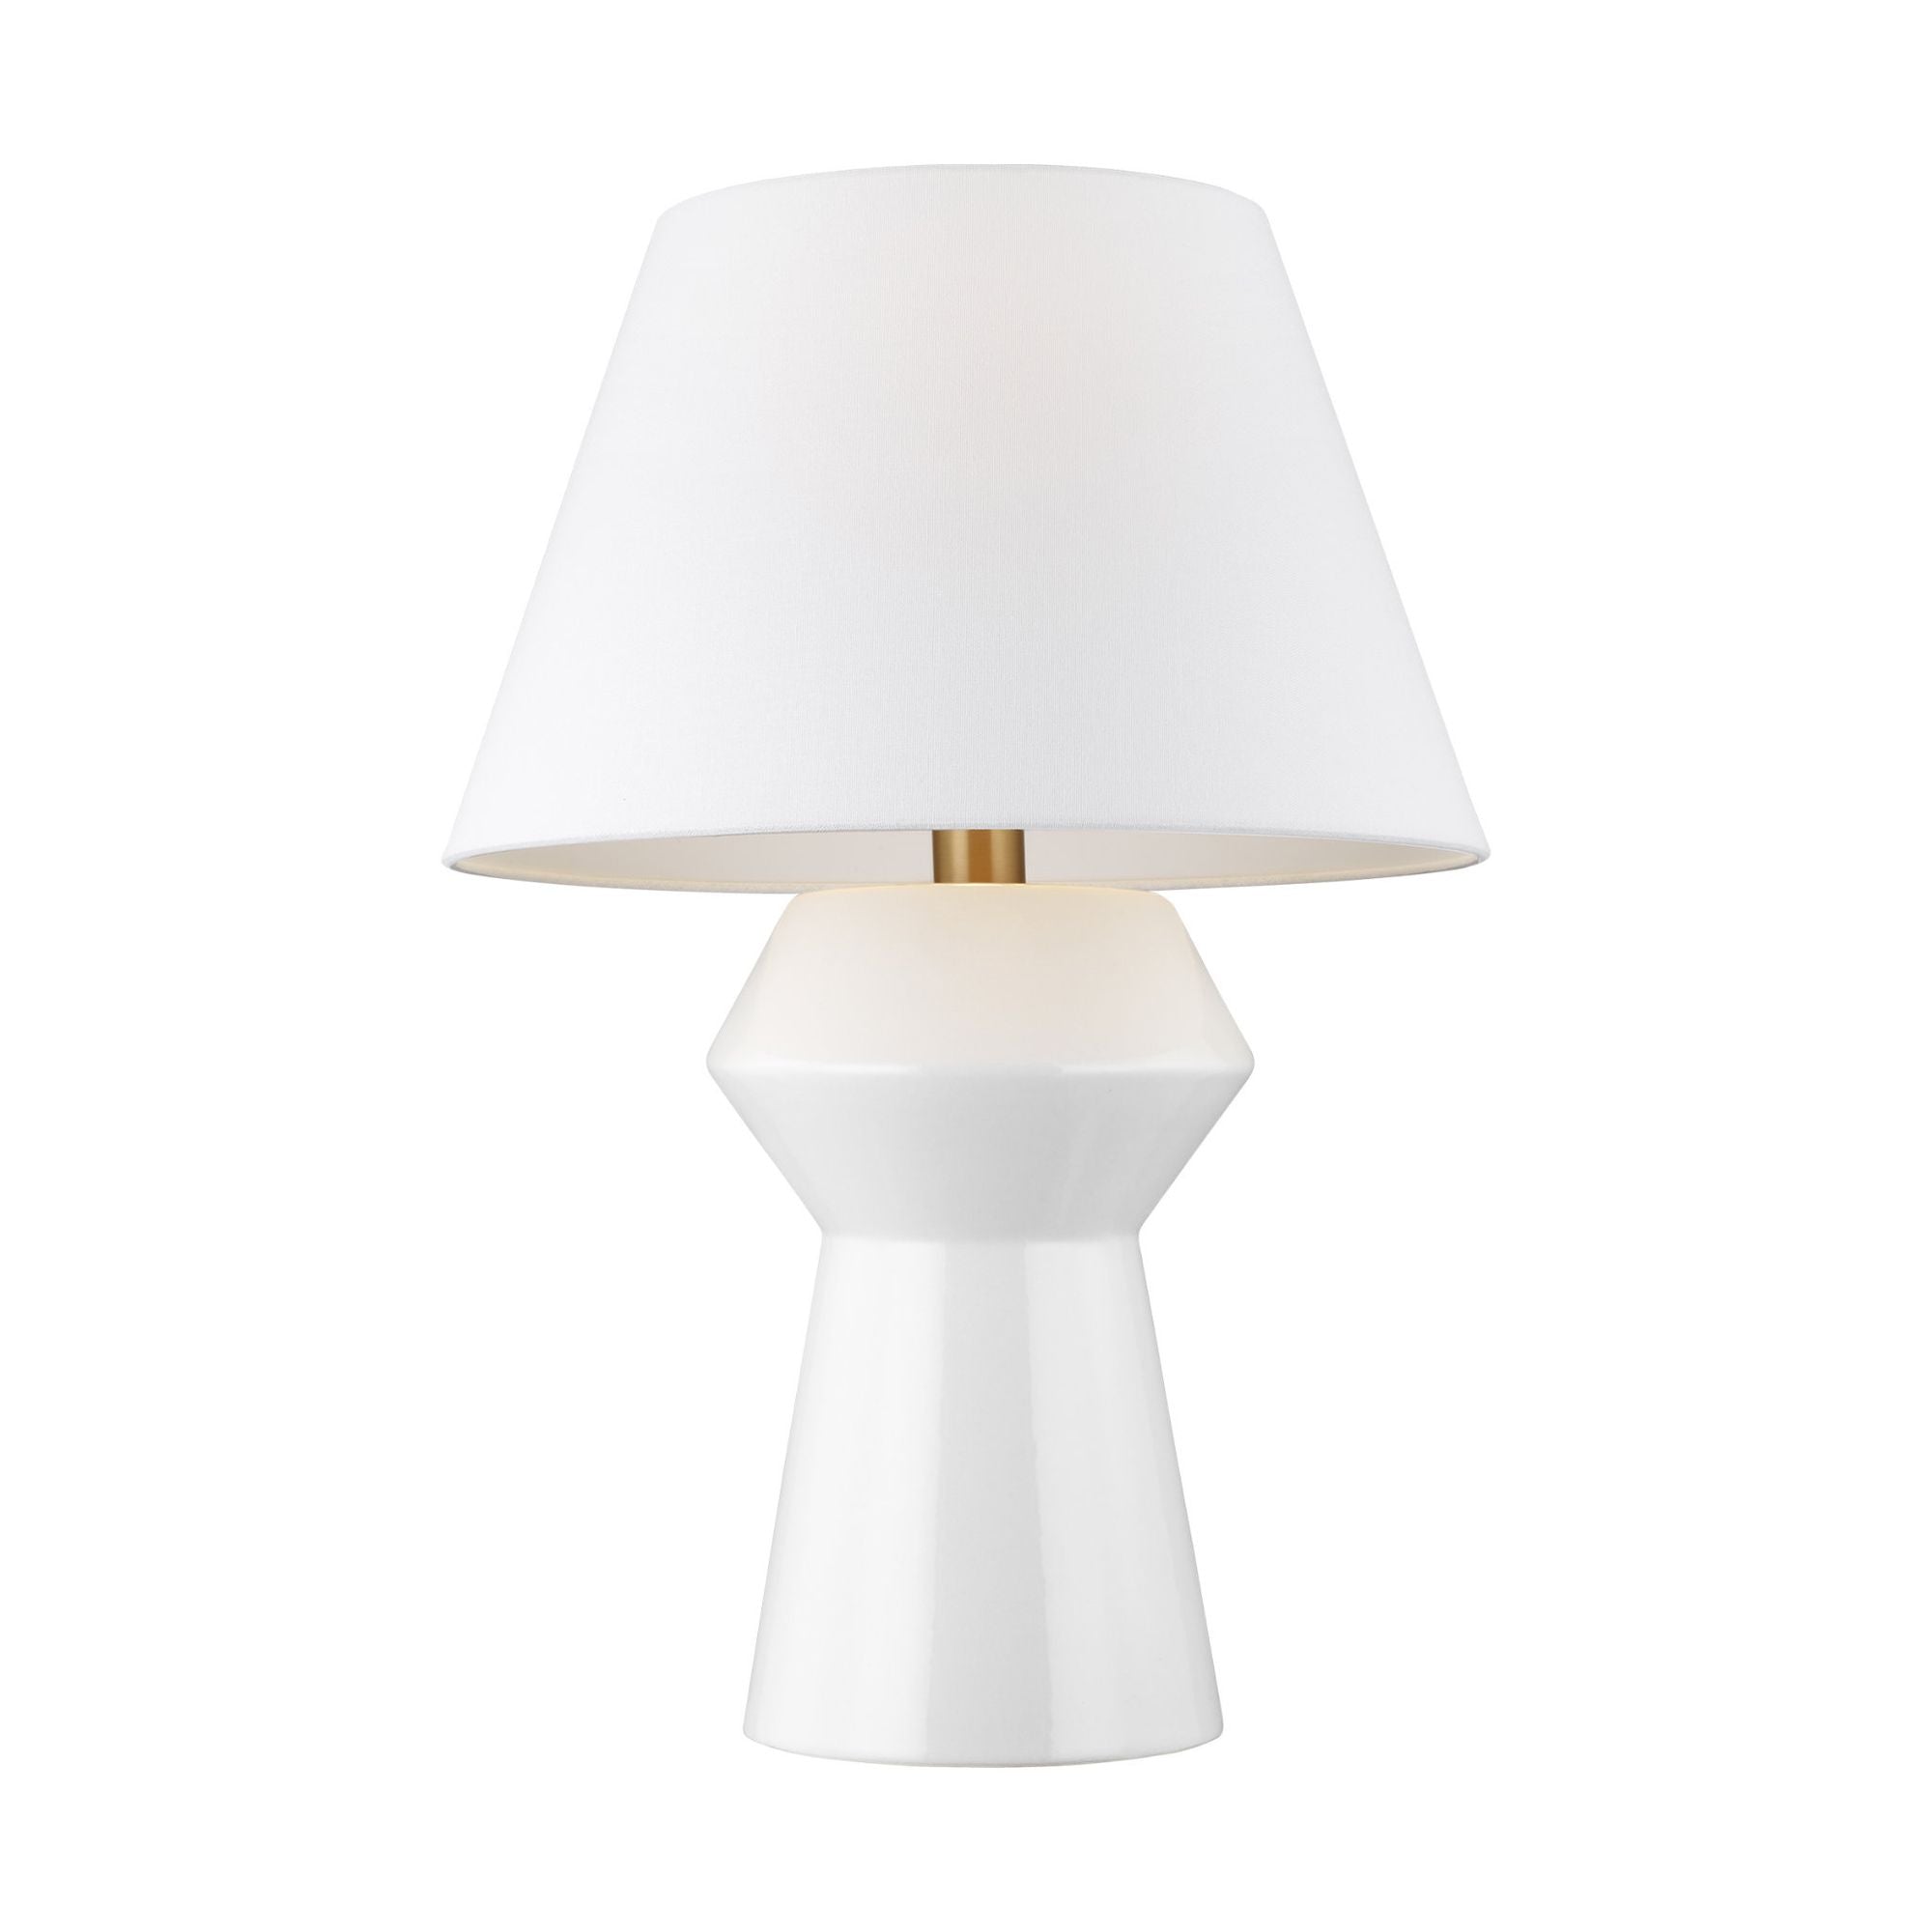 Chapman & Myers Abaco Inverted Table Lamp in Arctic White